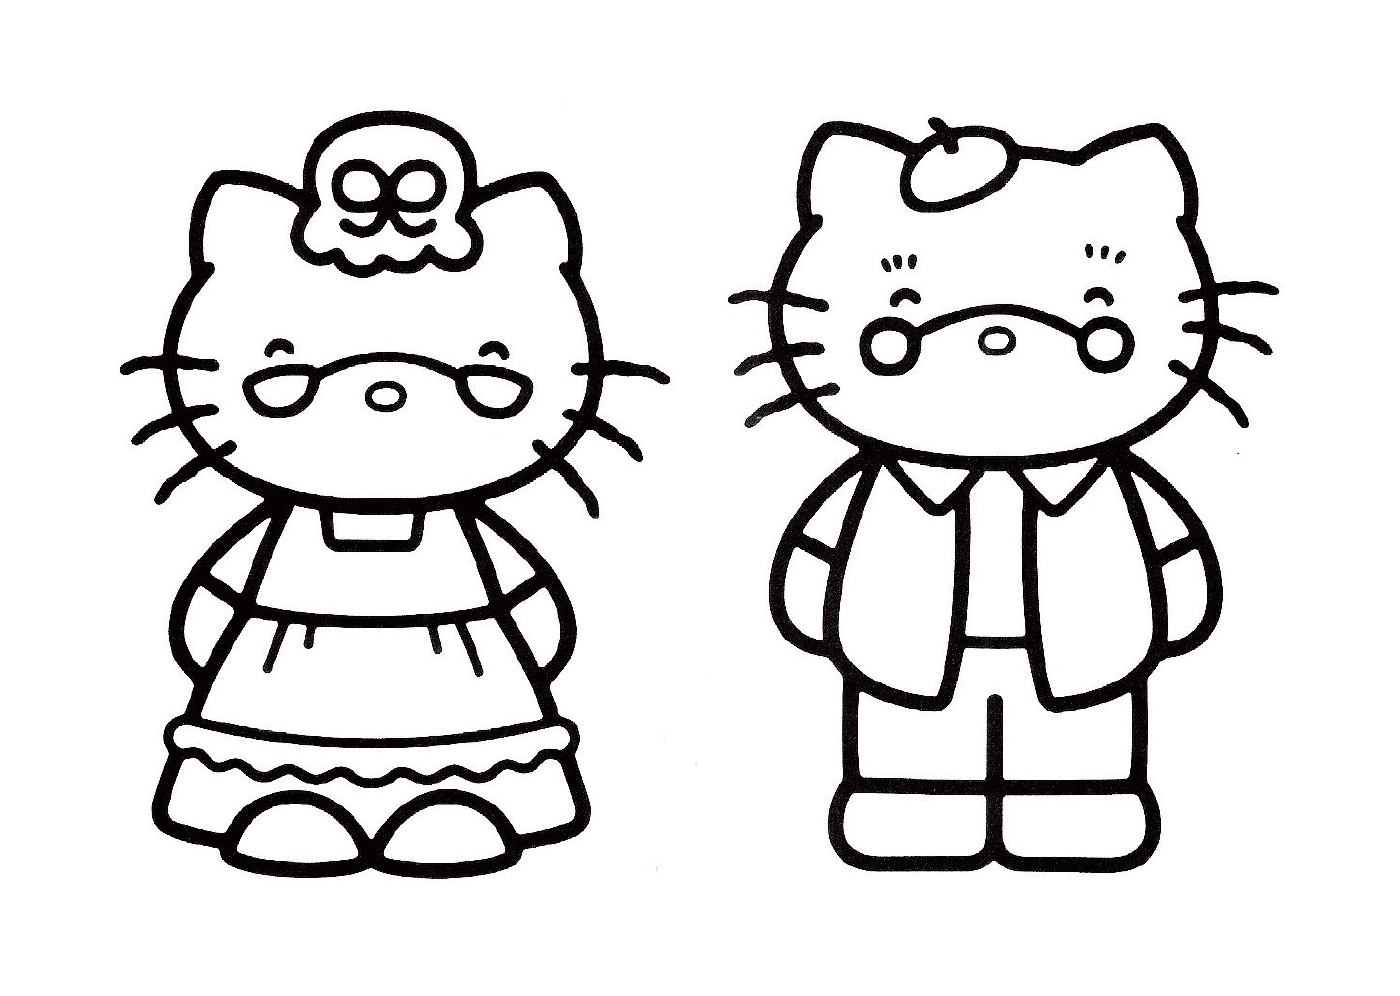   Deux personnages Hello Kitty 